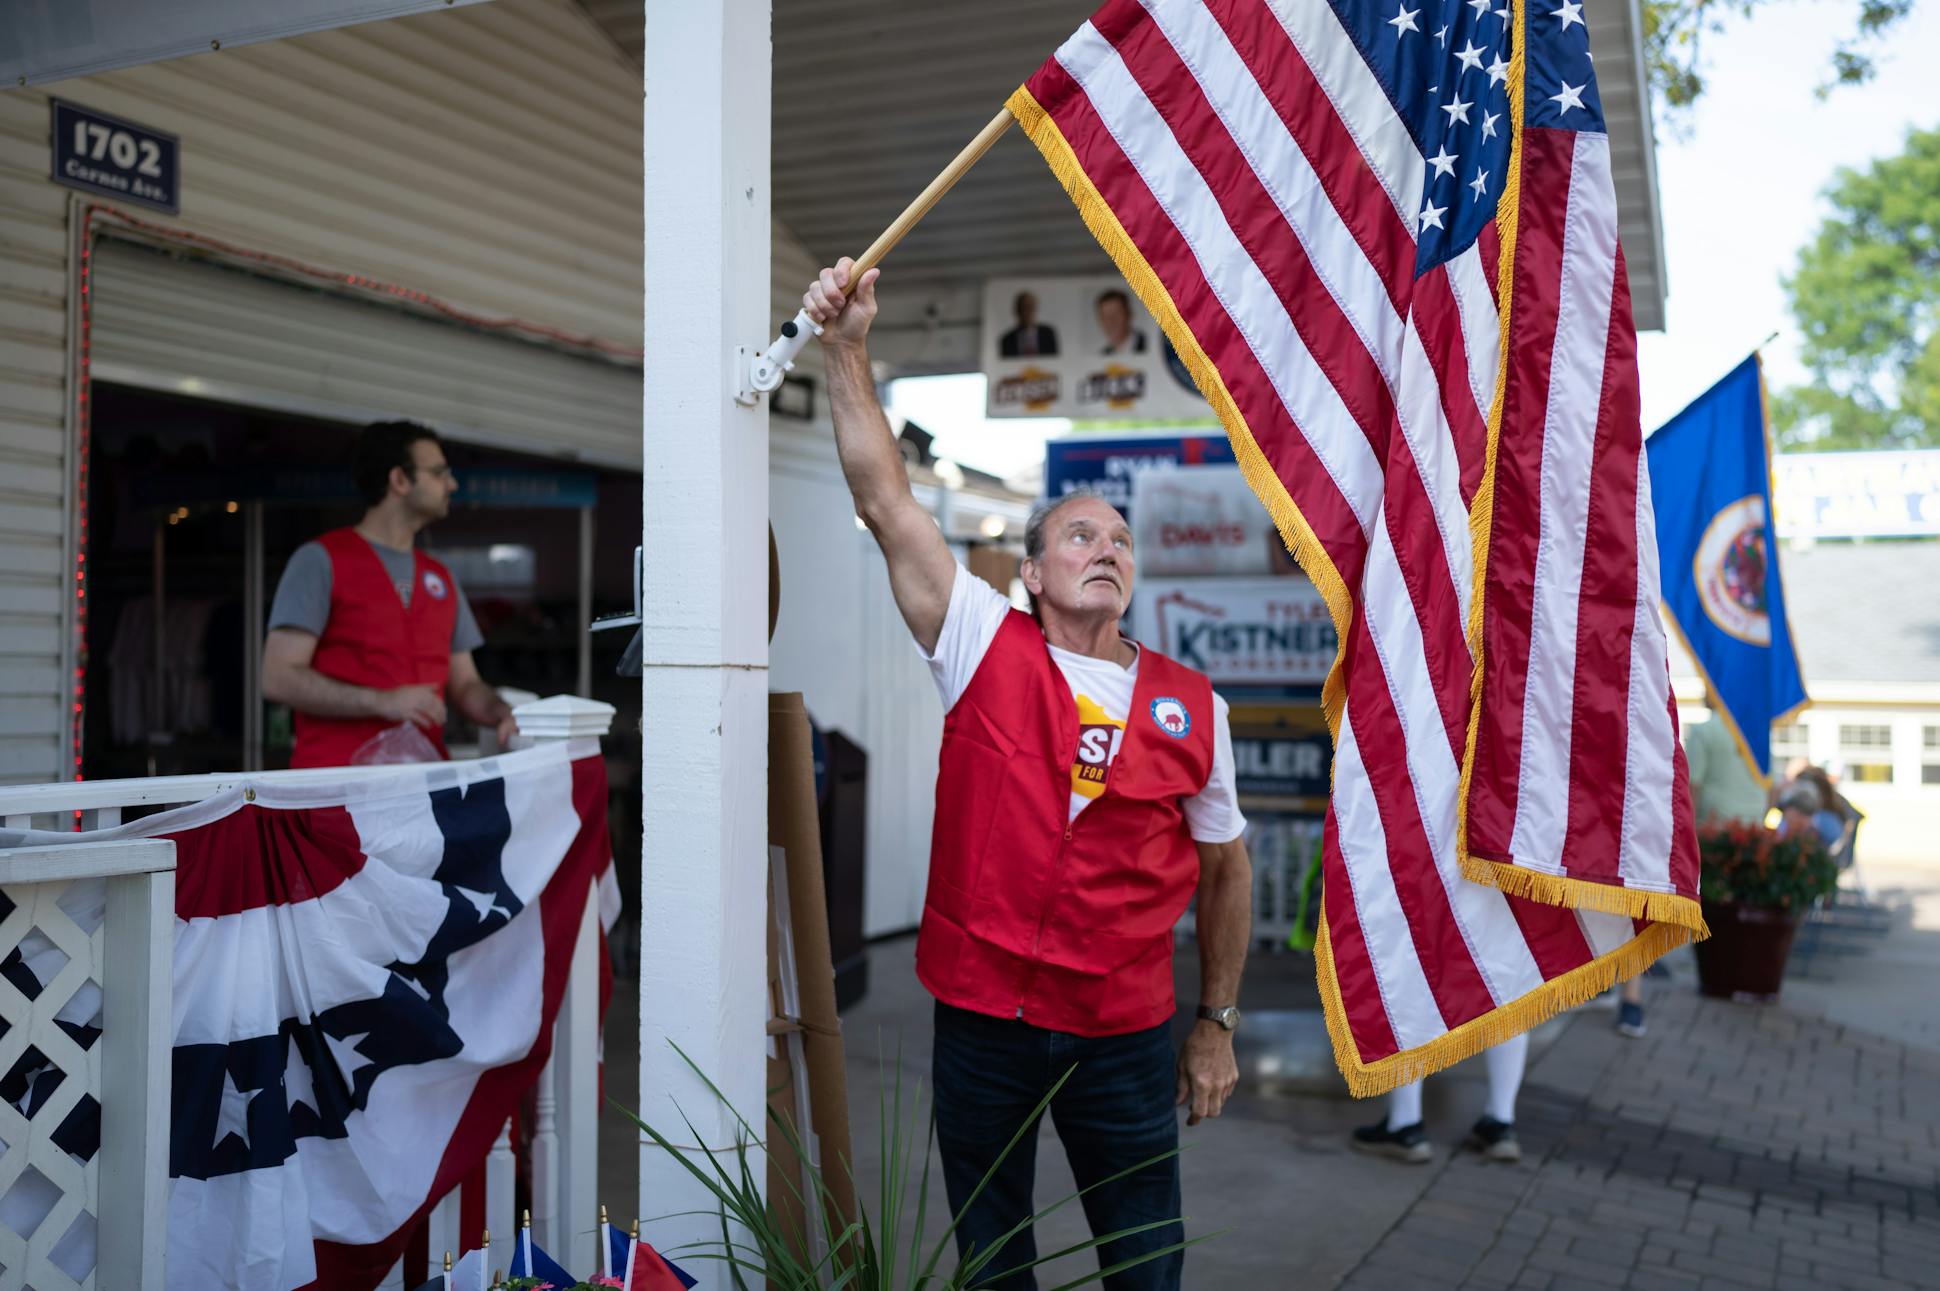 On the morning of Aug. 26, Radja Lohse, a volunteer at the Republican booth at the State Fair, placed the American flag in its holder and said, “There, now we are open!”